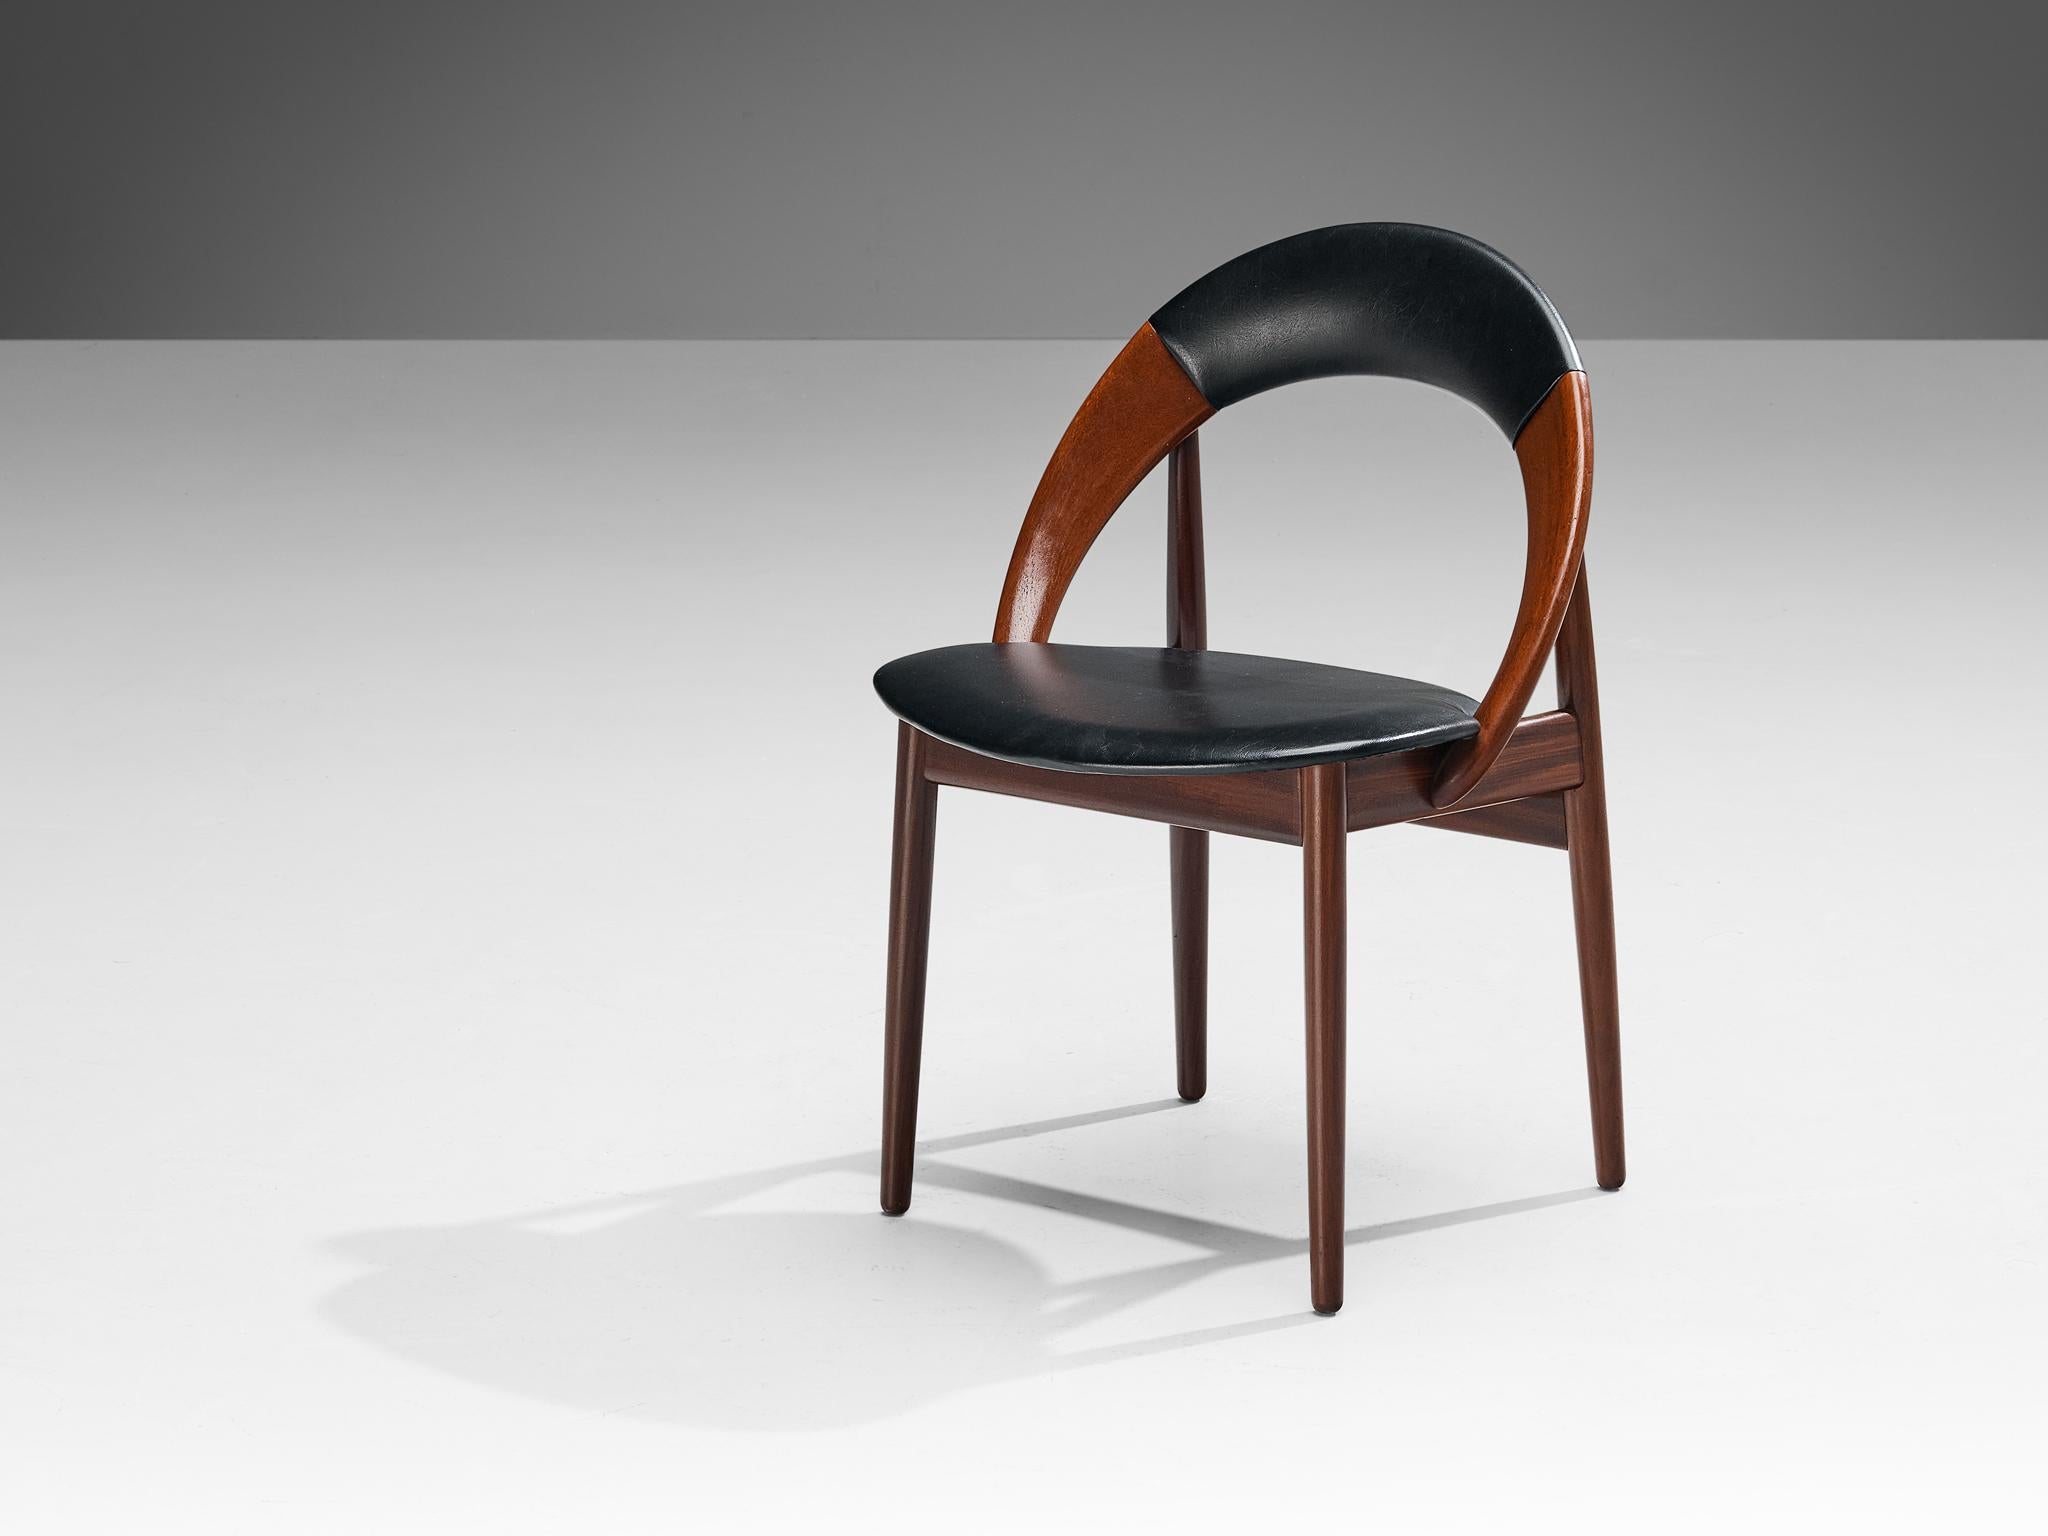 Arne Hovmand-Olsen dining chair, teak, leatherette, Denmark, 1960s 

Dining chair designed by the Danish designer Arne Hovmand-Olsen. The chair has a very simple and organic design. The rounded back turns into the armrest and seating in one flowing